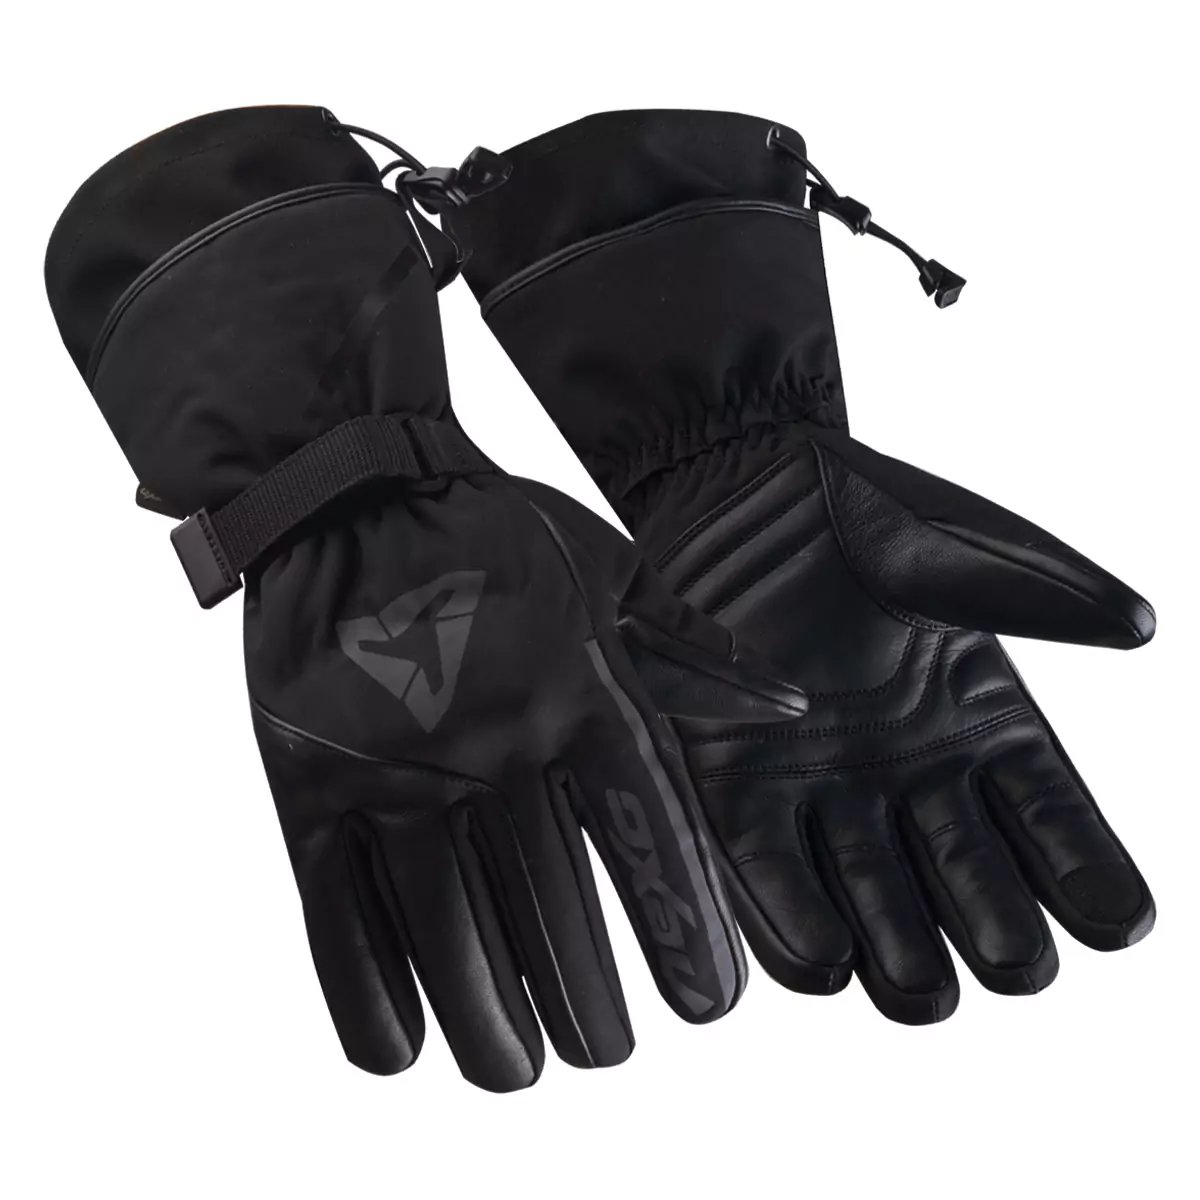 Pair of versatile leather winter riding gloves providing comfort and protection in varying weather conditions.